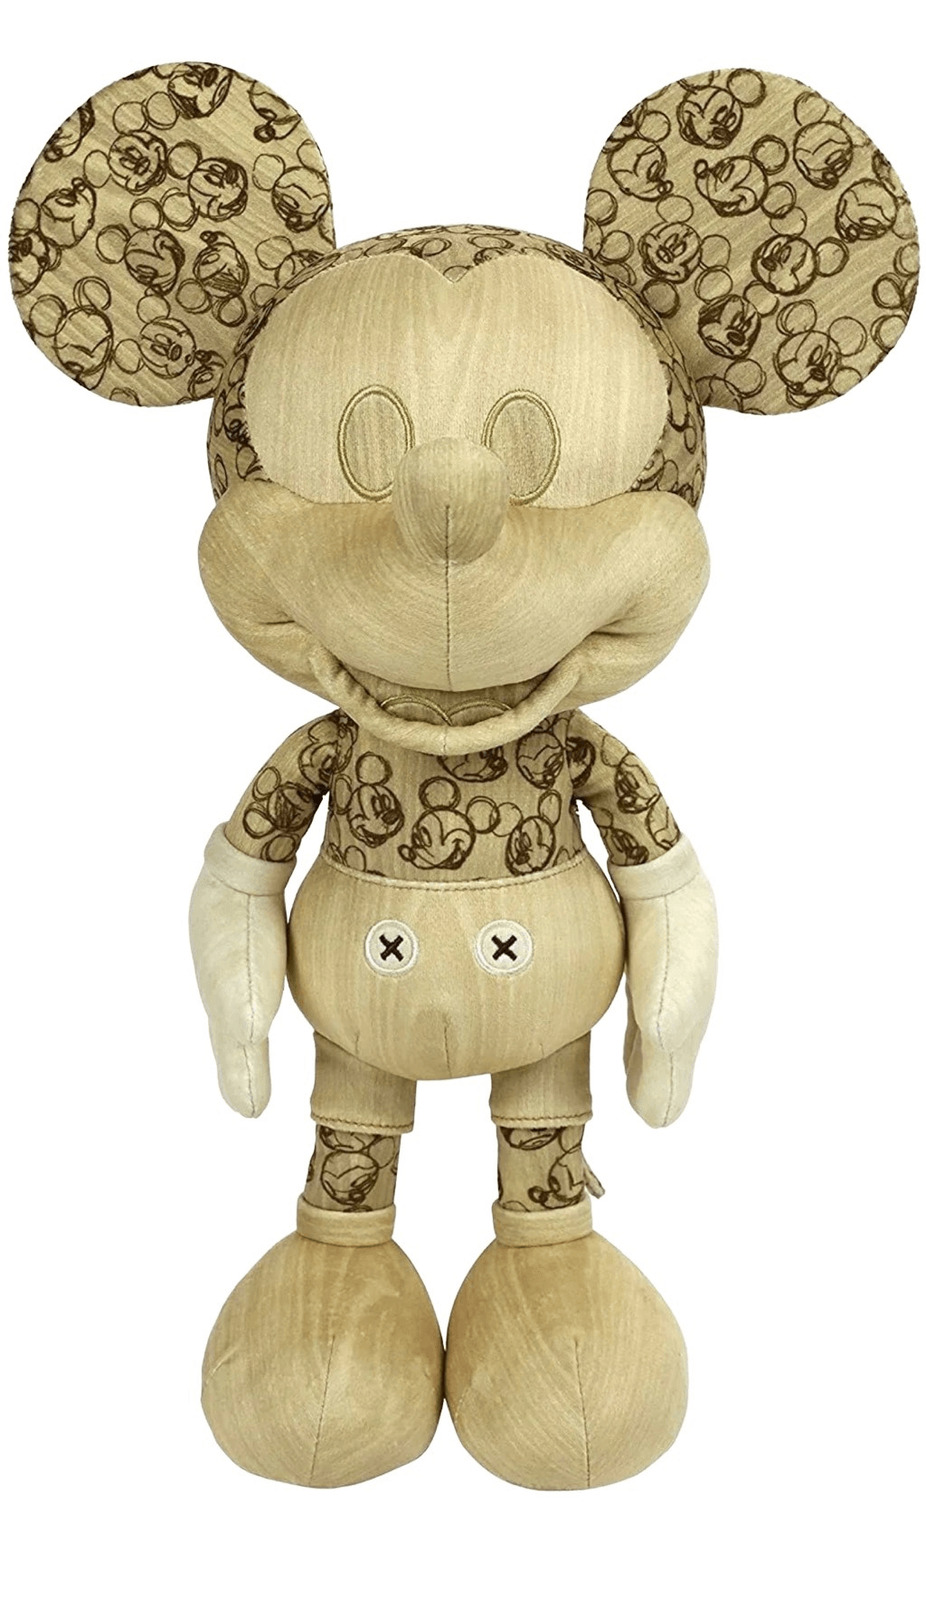 2020 The Limited-edition Disney Animator Mickey Mouse Plush